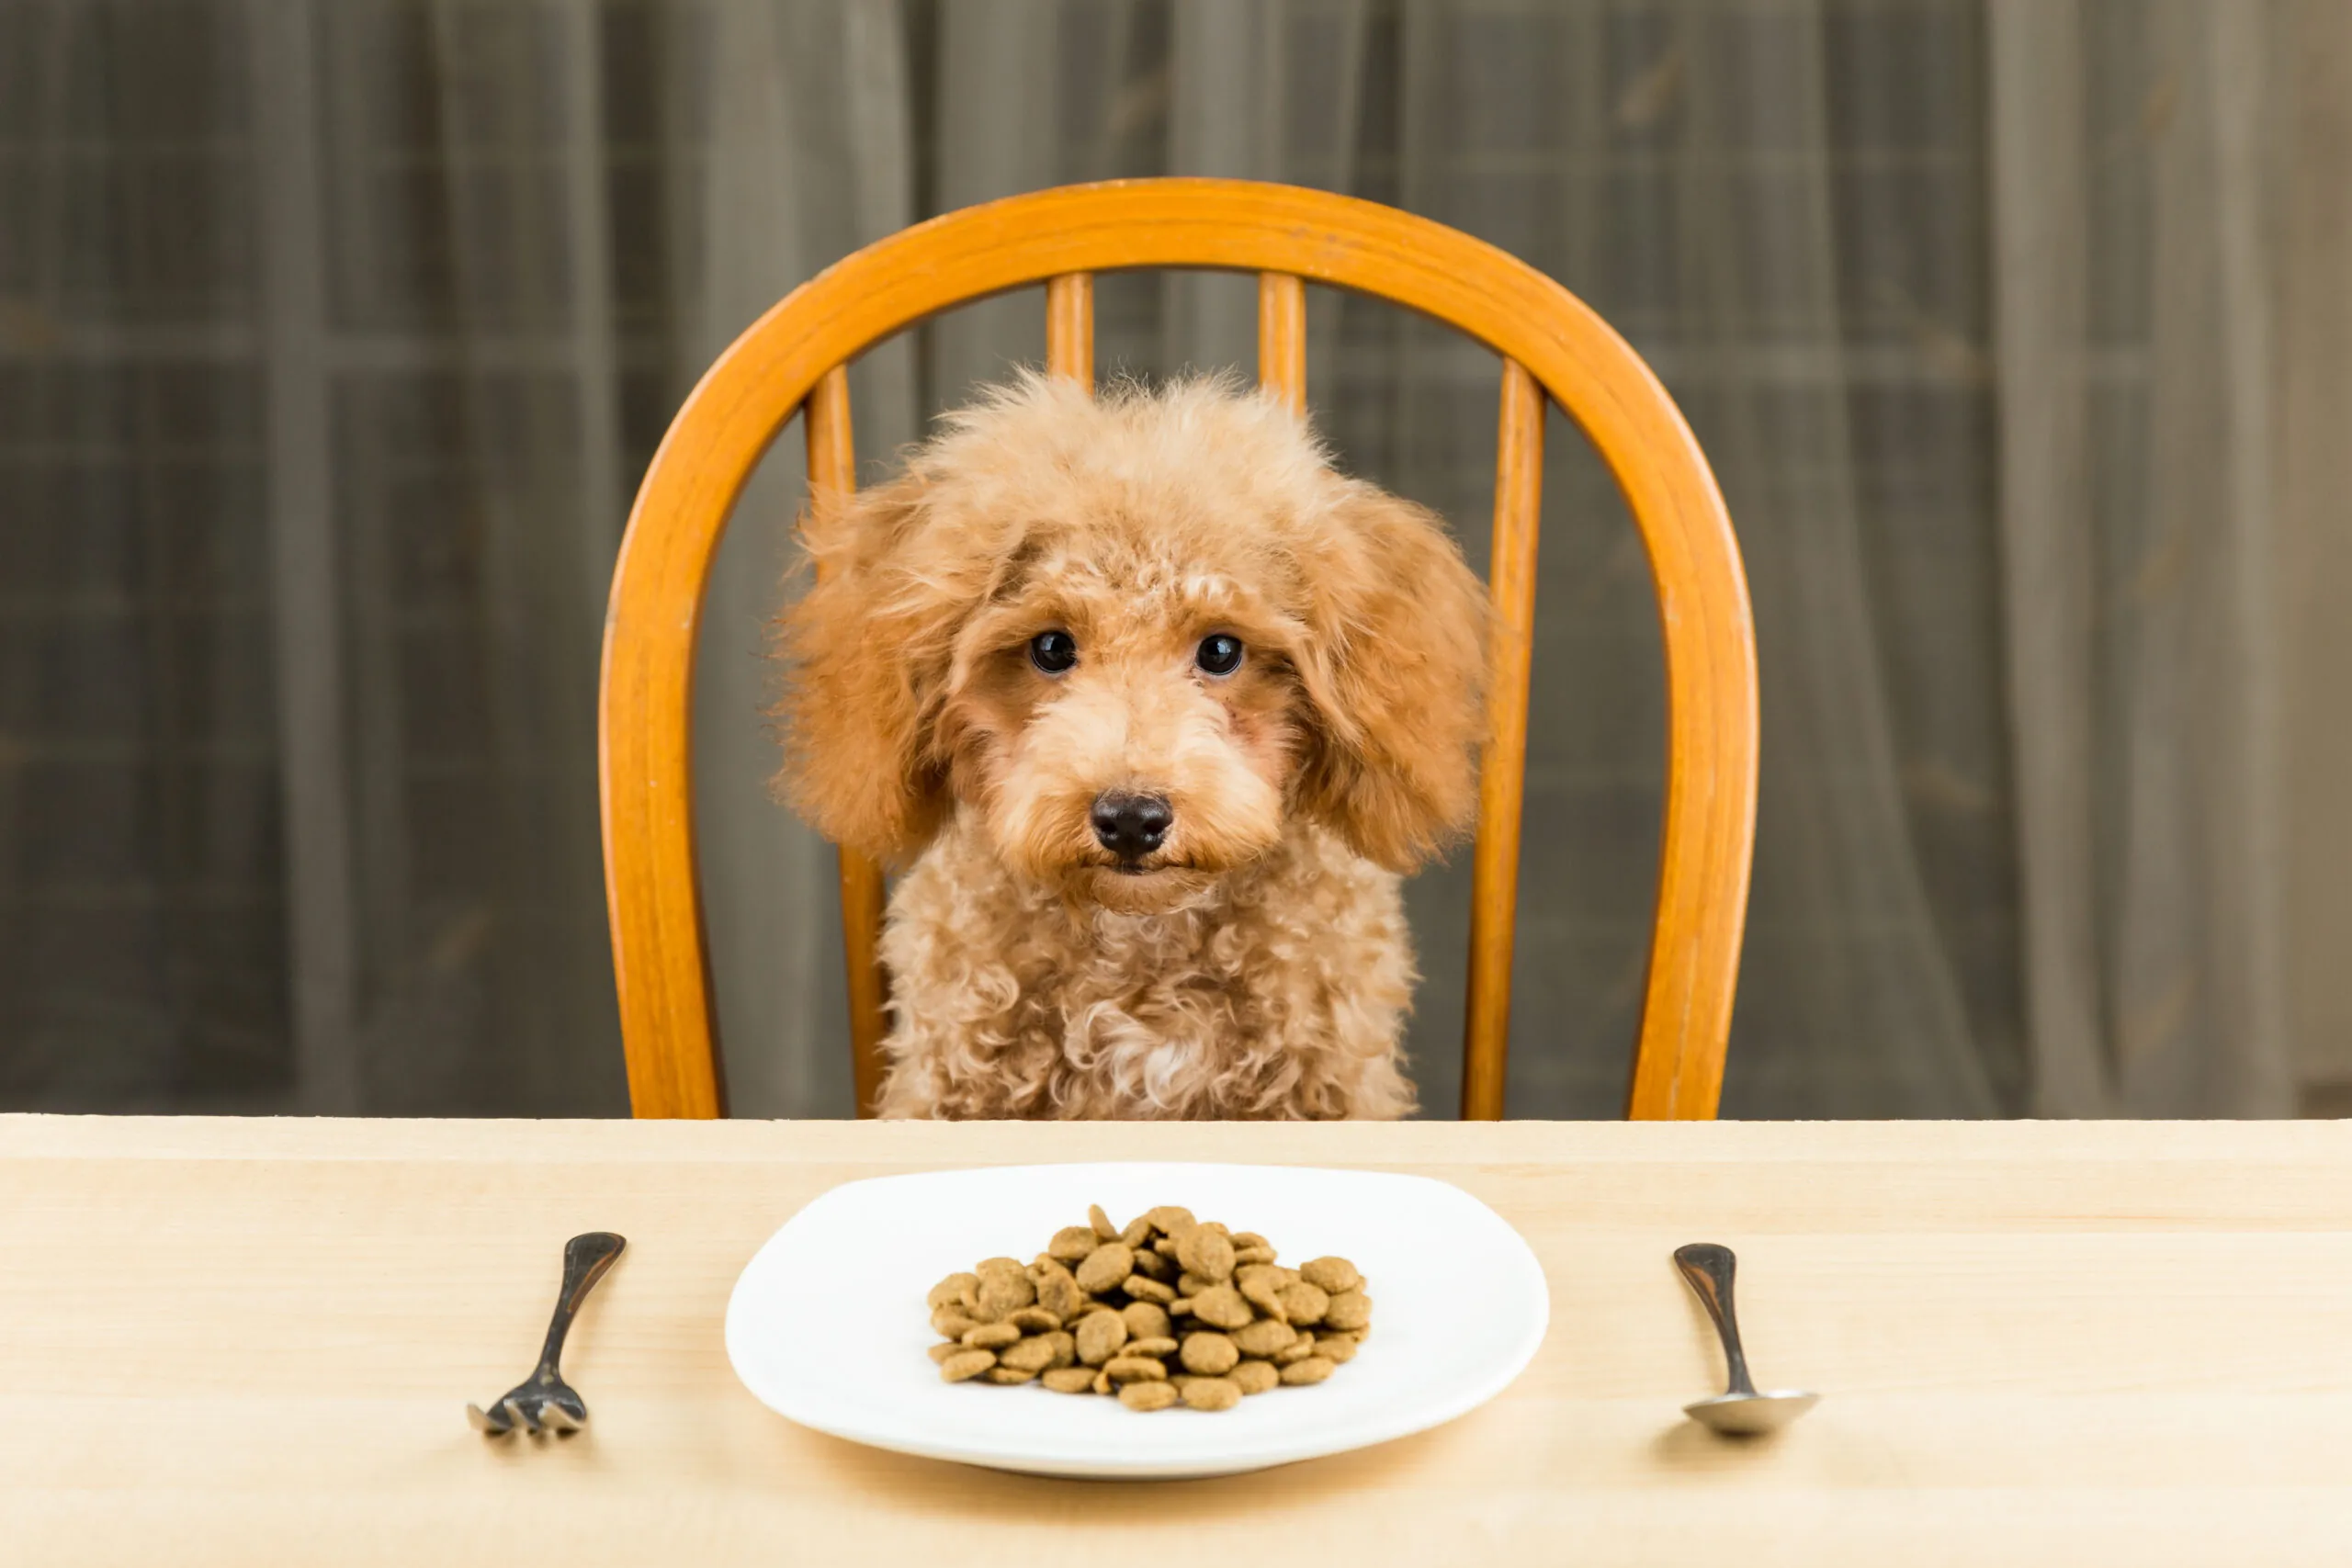 Can dogs eat food at a table?